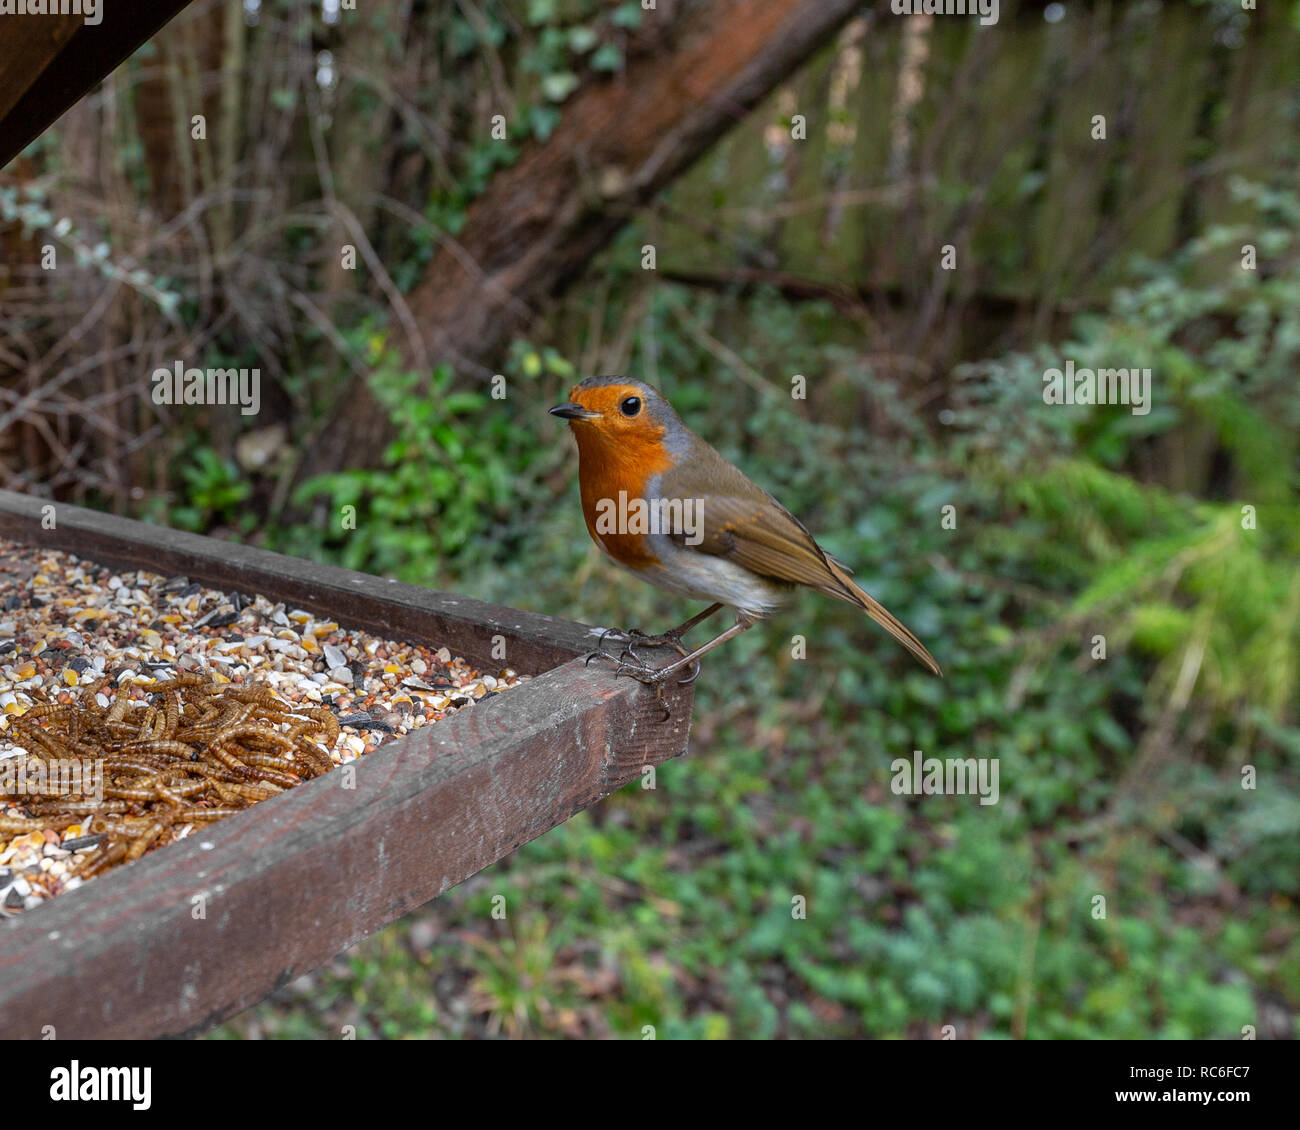 Cambridge, UK. 14th Jan, 2019. A European robin perched on a bird feeding table in a Cambridgeshire garden taken with a wide angle lens and a camera trap for a different perspective of Britain's favourite bird. Garden birds such as the robin rely on these feeding stations in the winter for survival. With the fast approaching cold snap and snow it is important that gardens where feeders are located are kept fully stocked up to ensure the british birds get all the help they need. Credit: Jonathan Mbu/Alamy Live News. Stock Photo